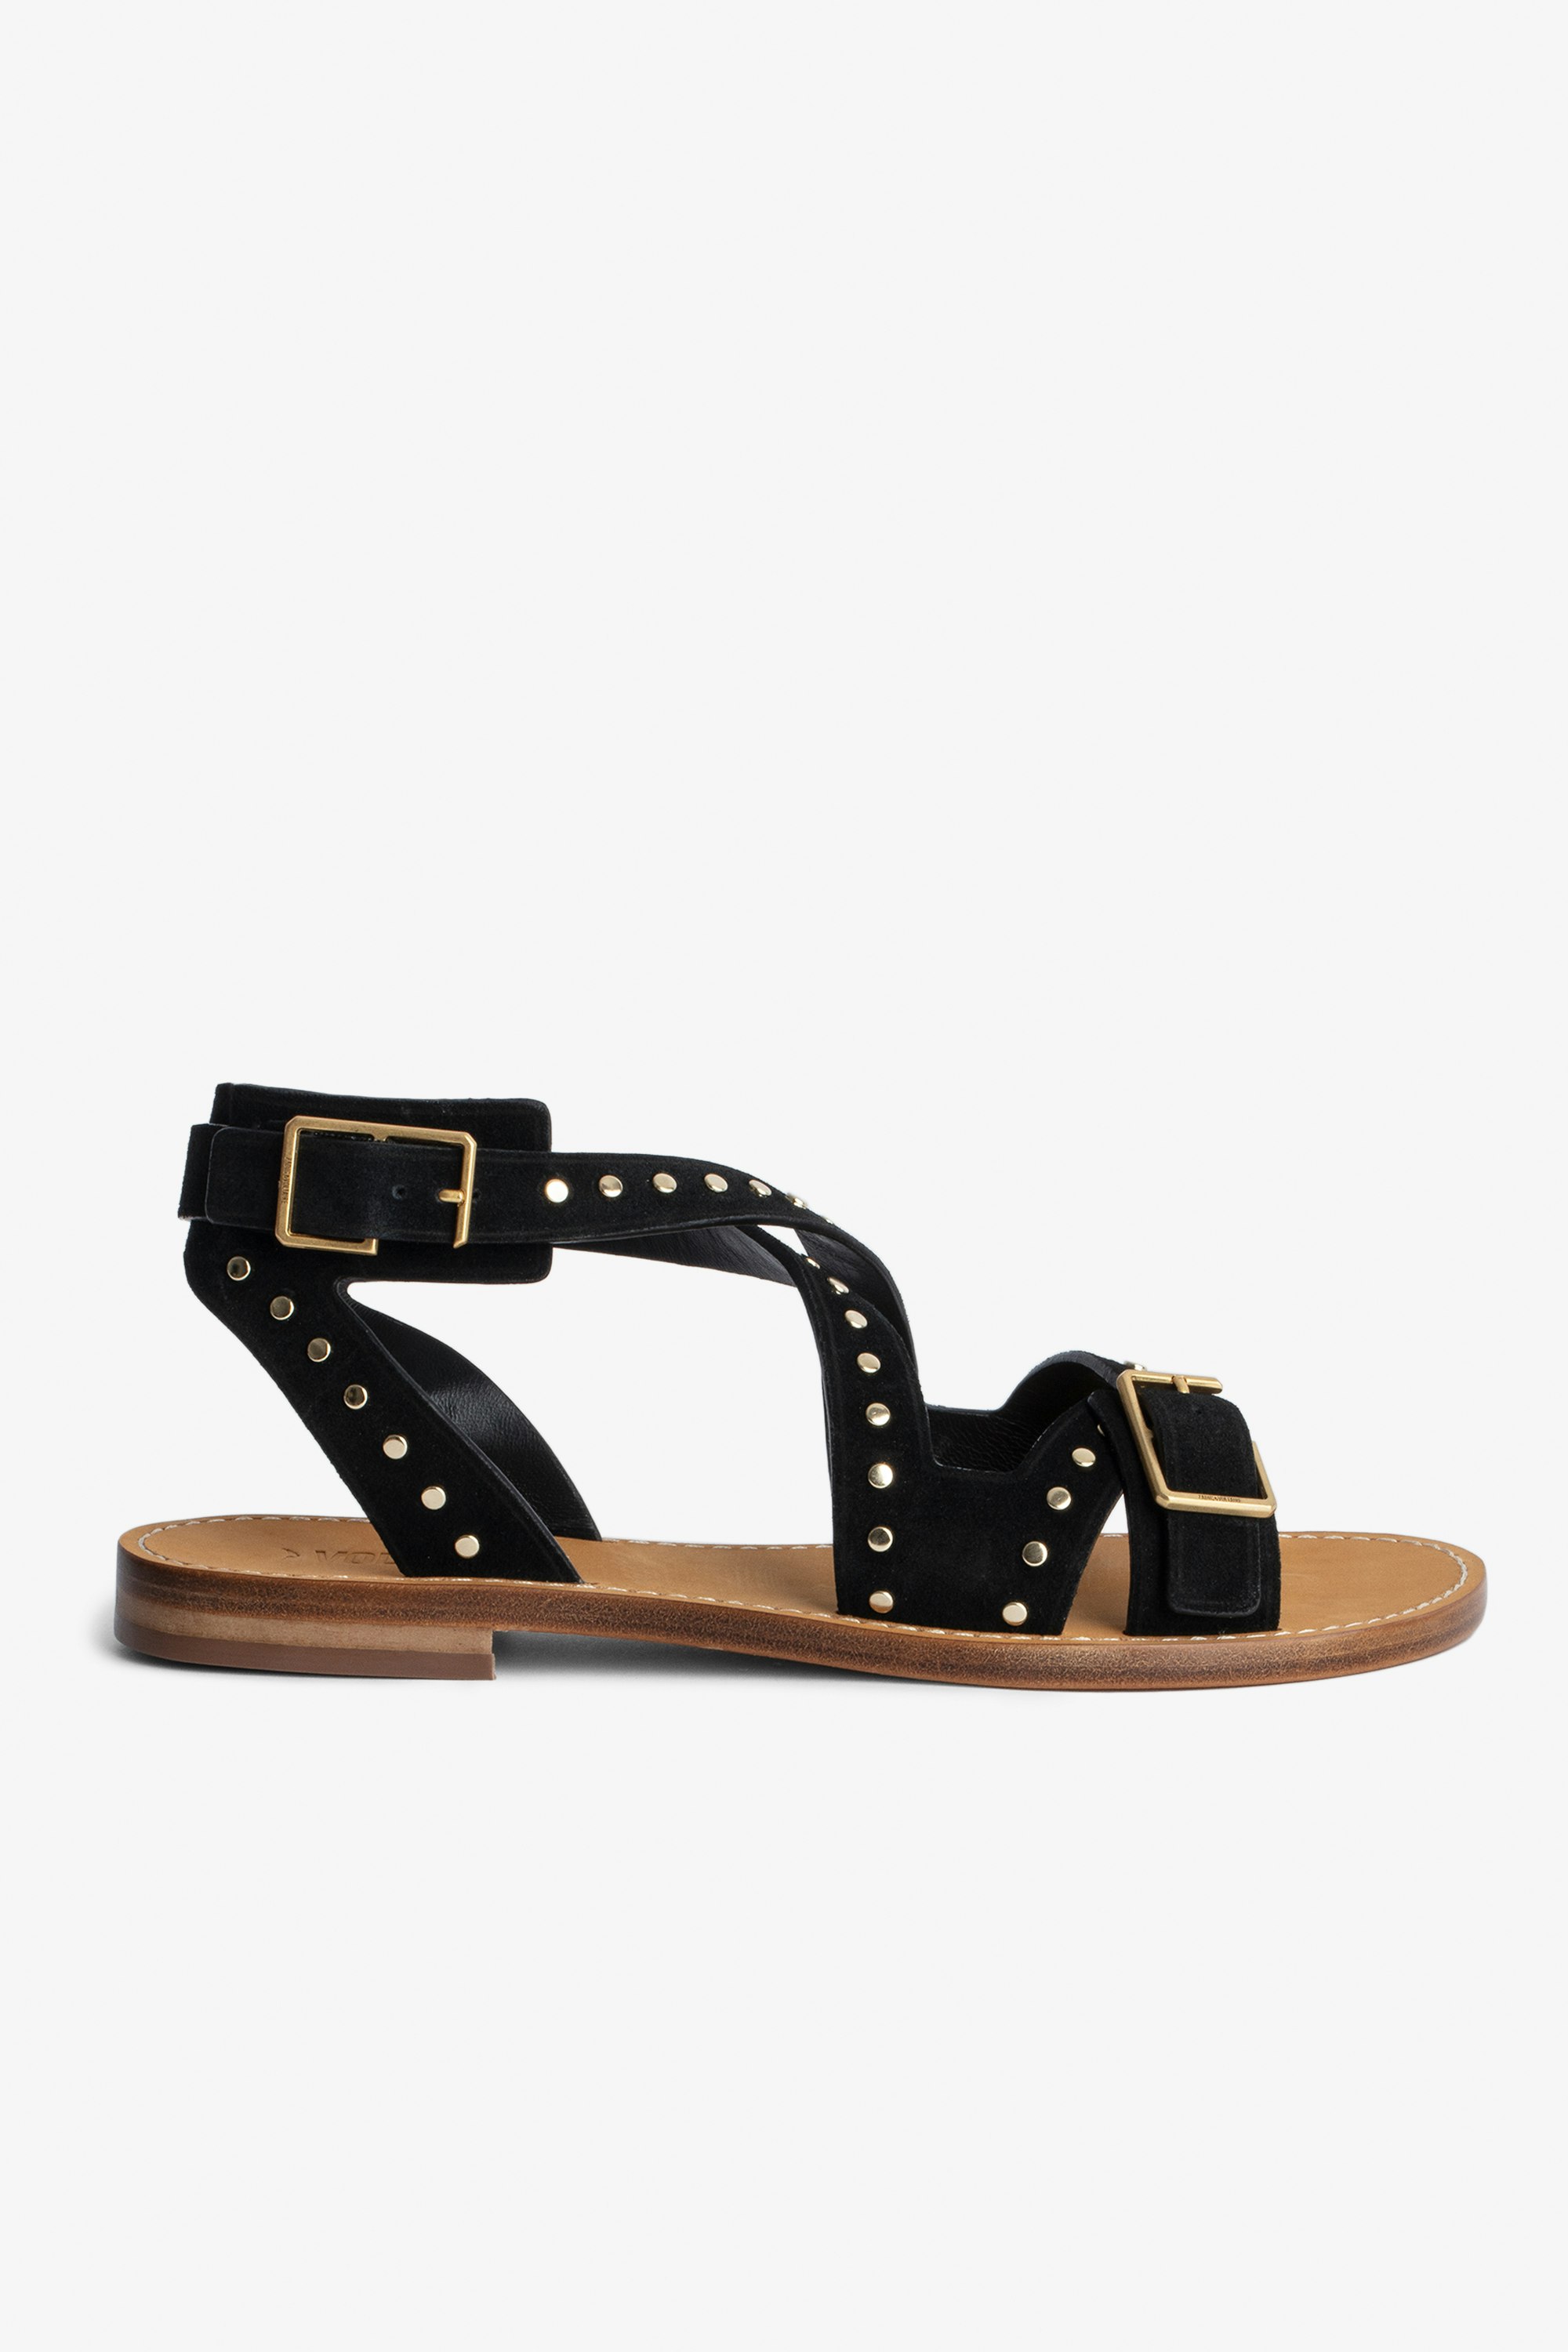 Cecilia Caprese Sandals Women's black suede sandals with studs, straps and gold C-shaped buckles